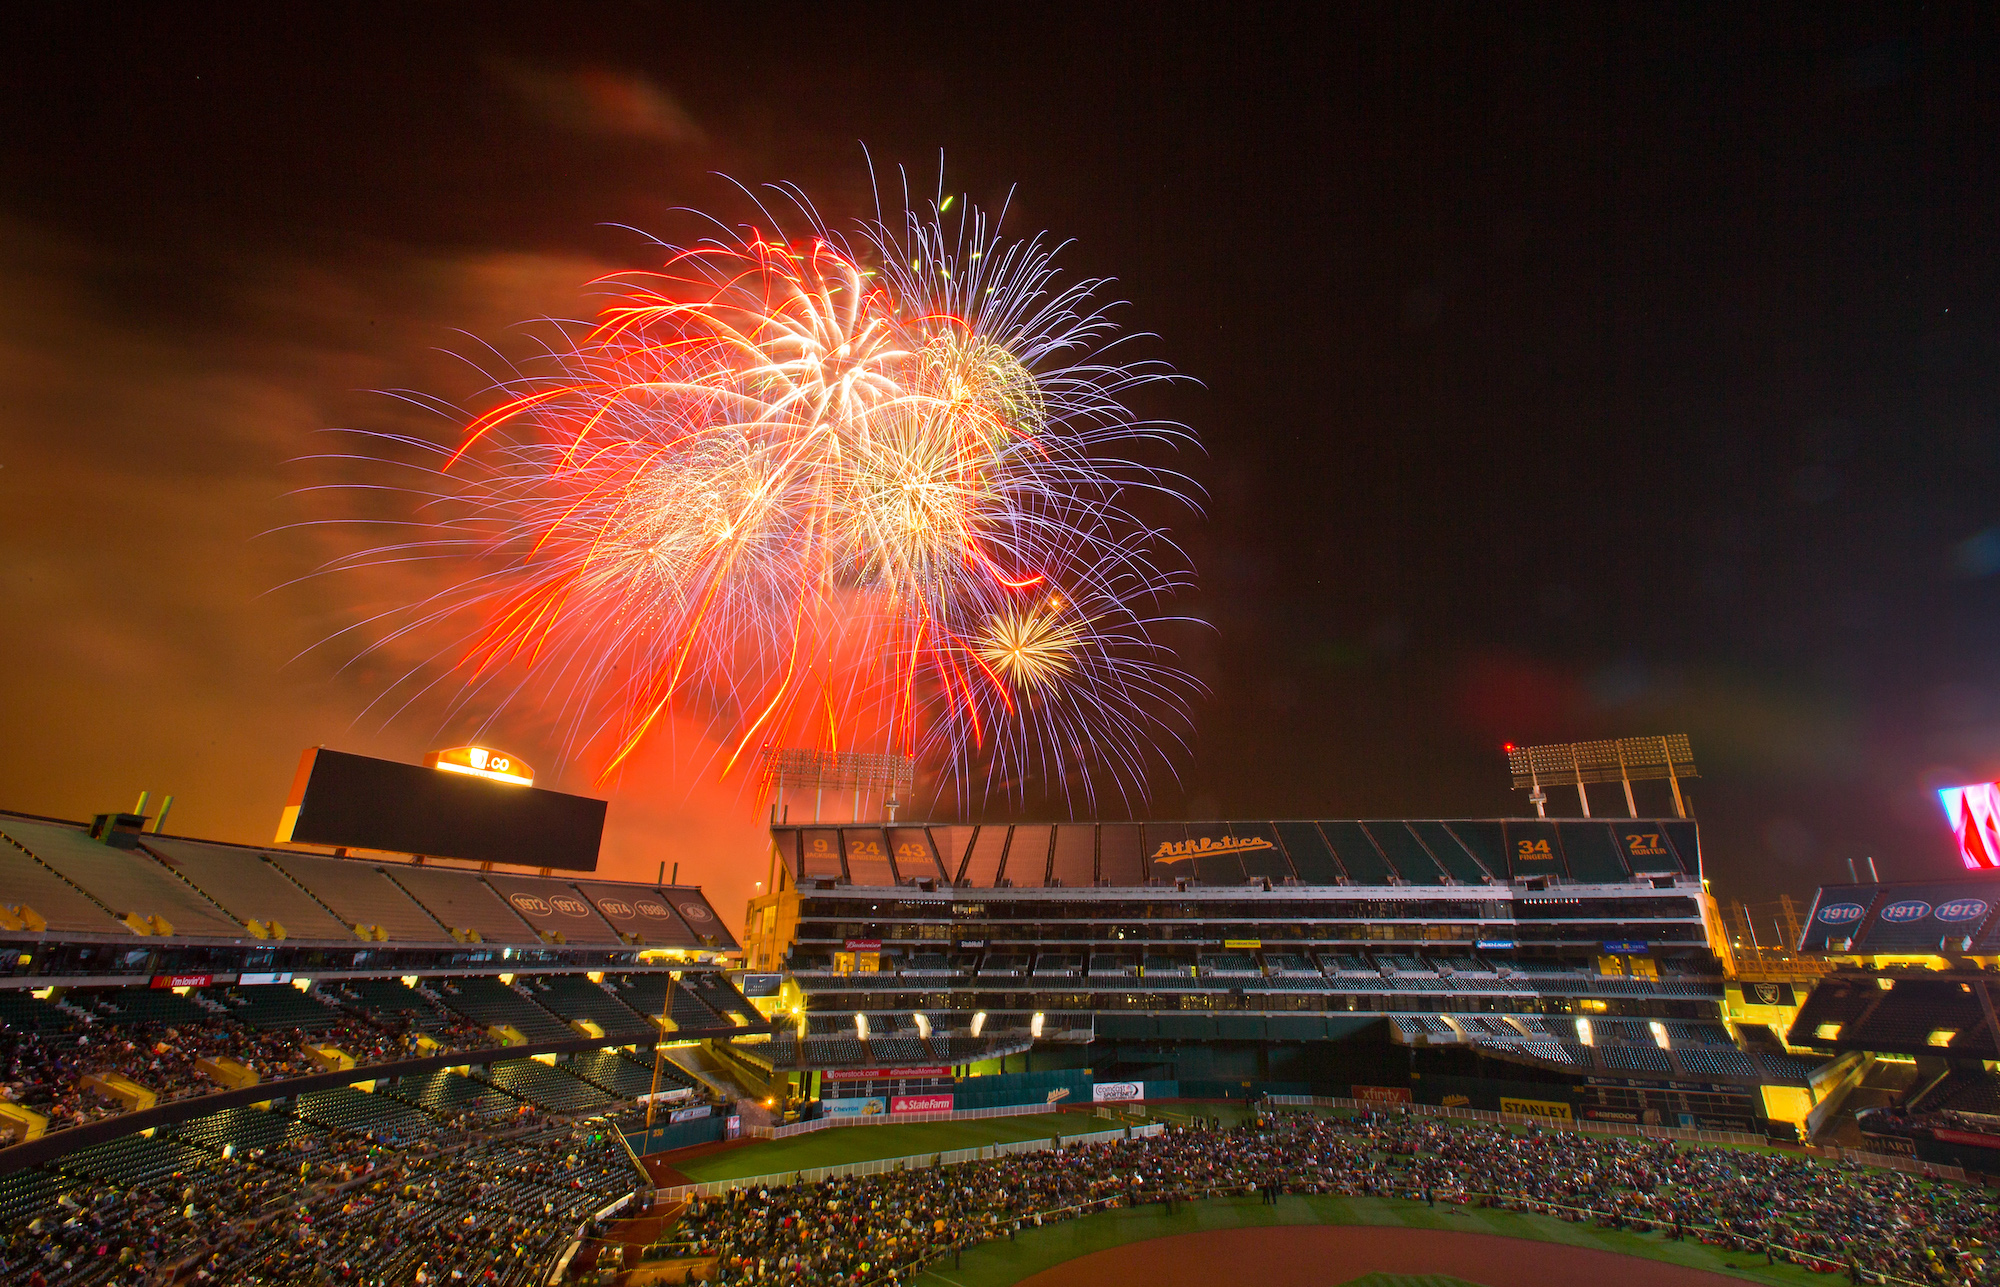 OAKLAND, CA - JUNE 19: Fans crowd onto the field for fireworks after a game between the Oakland Athletics and the Los Angeles Angels of Anaheim at O.co Coliseum on June 19, 2015 in Oakland, California. The Angels won 12-7. (Photo by Brian Bahr/Getty Images)